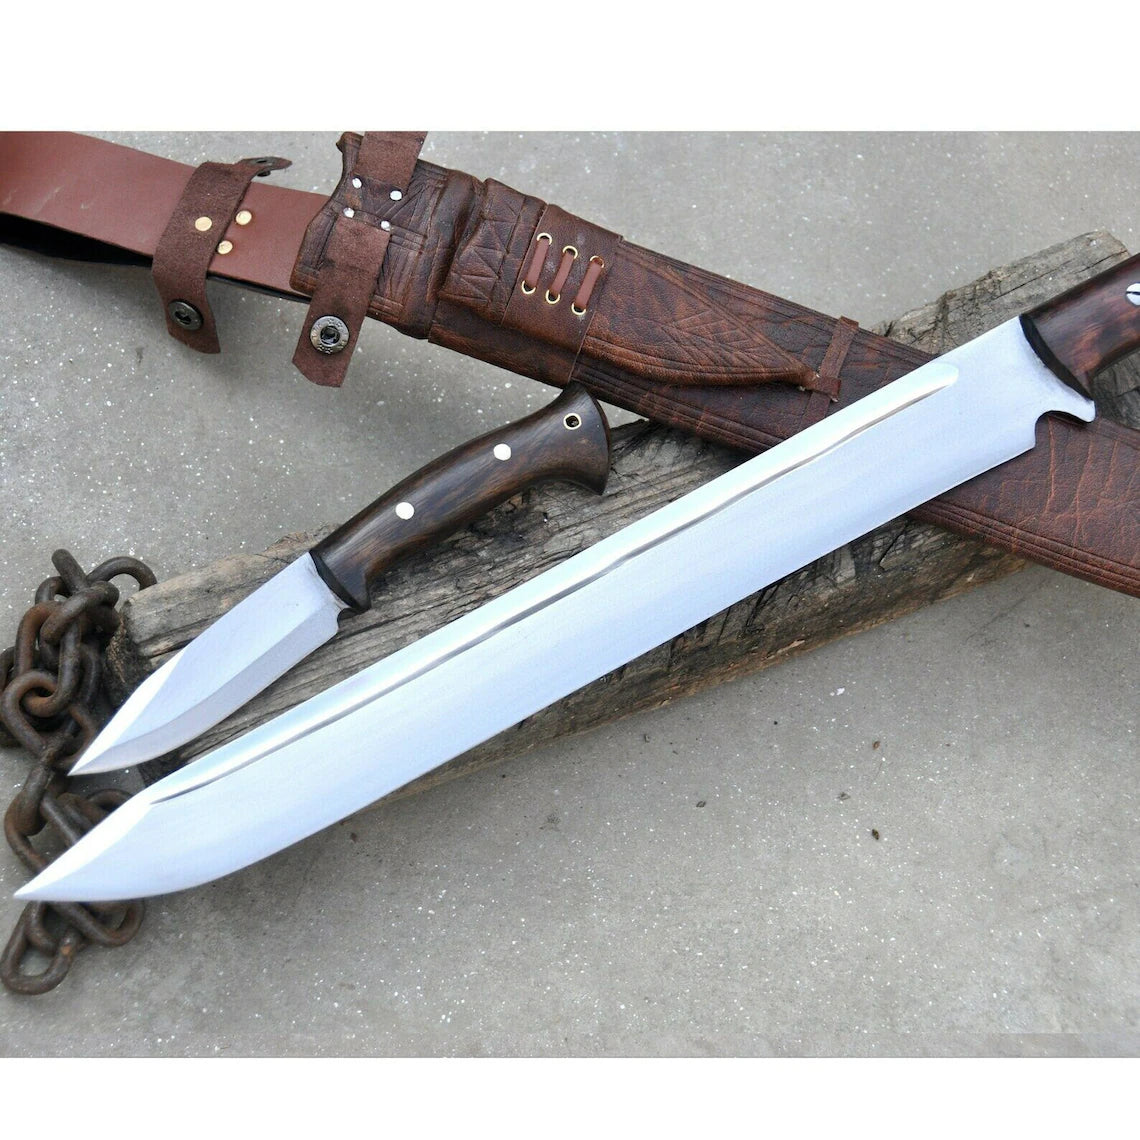 25" D2 Tool Steel Hunting SWORD with Gift Knife, Wood Handle, Free Leather Sheath, Sword and knife Set, Beautiful Gift, Christmas Gift